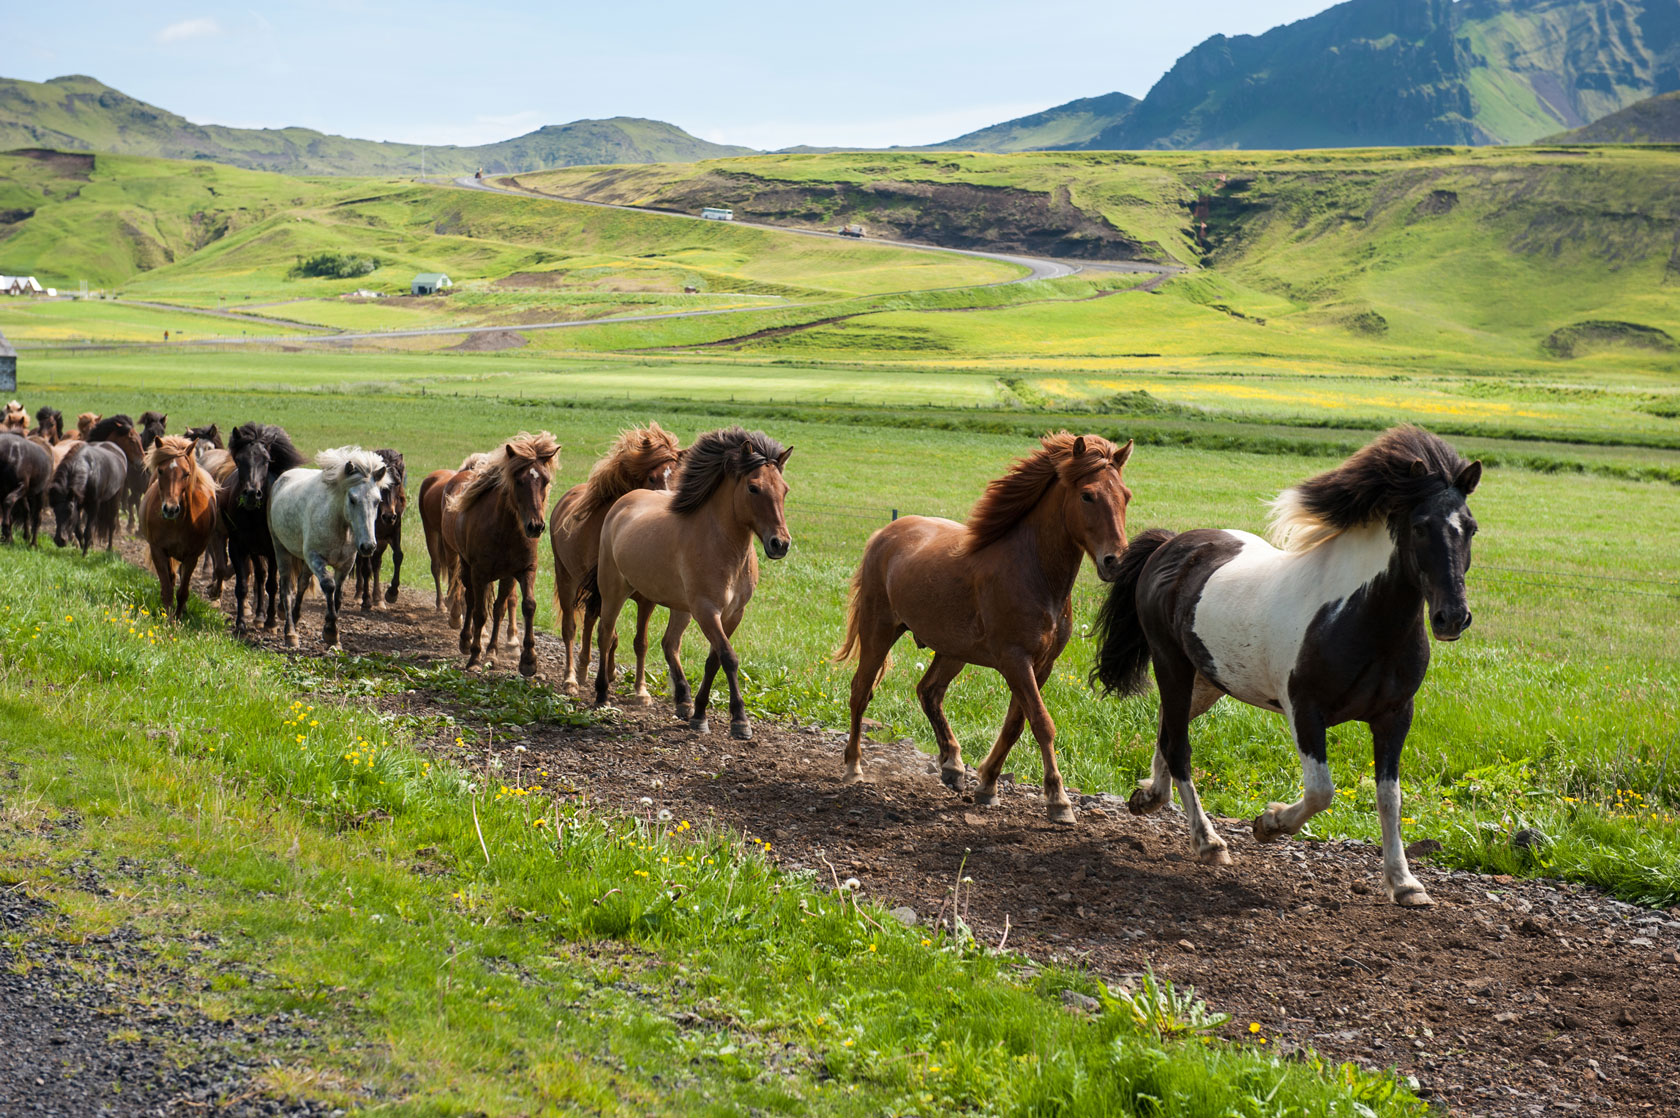 Icelandic horses galloping down a road, rural landscape, Iceland